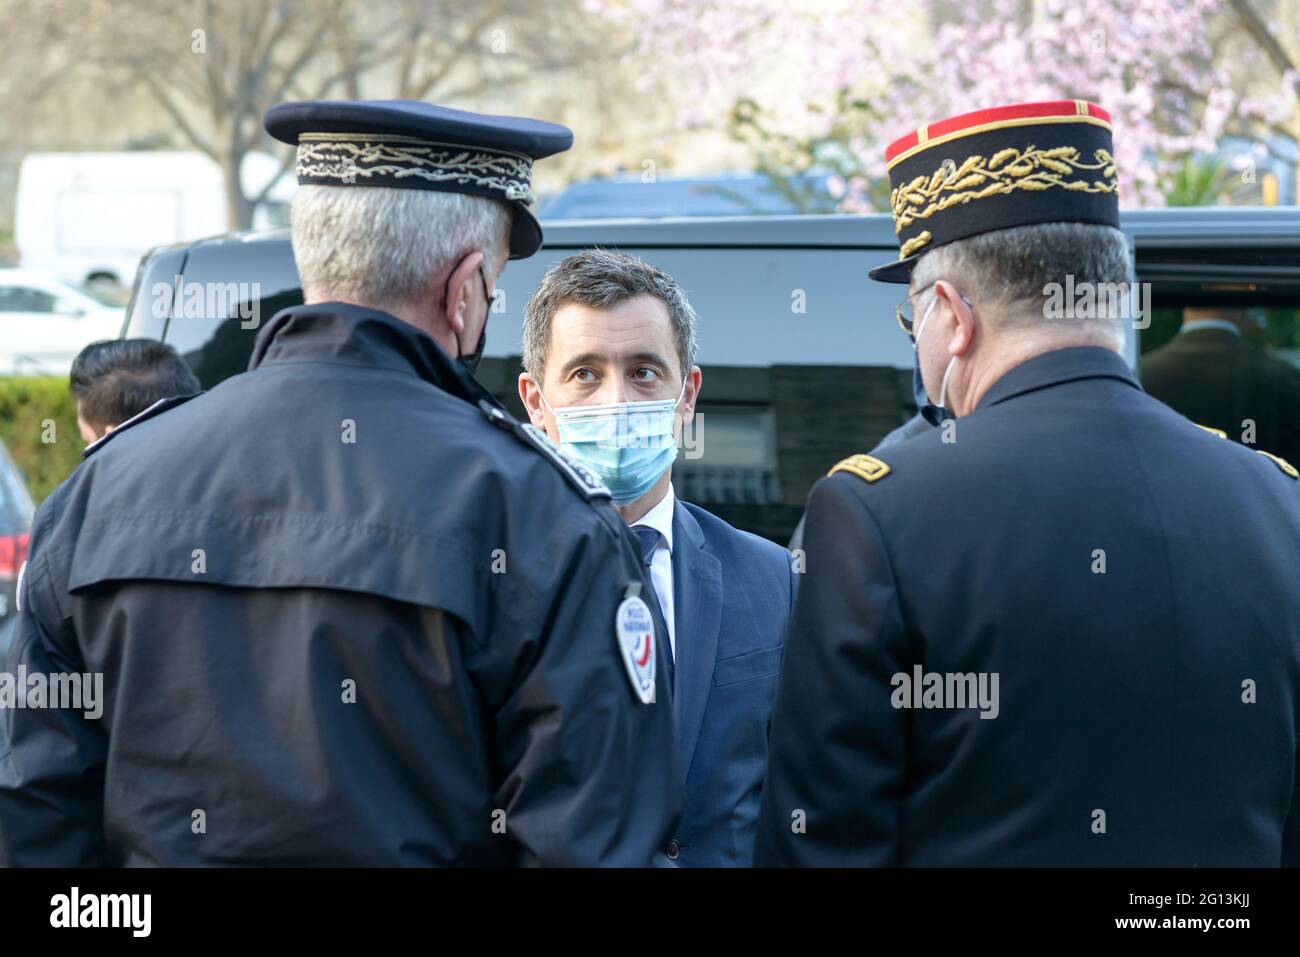 Gerald Darmanin (front center) talks with two police officers before  leaving a police station.Gerald Darmanin, Minister of Interior in Emmanuel  Macron's government, visits police stations every month to announce or  present the